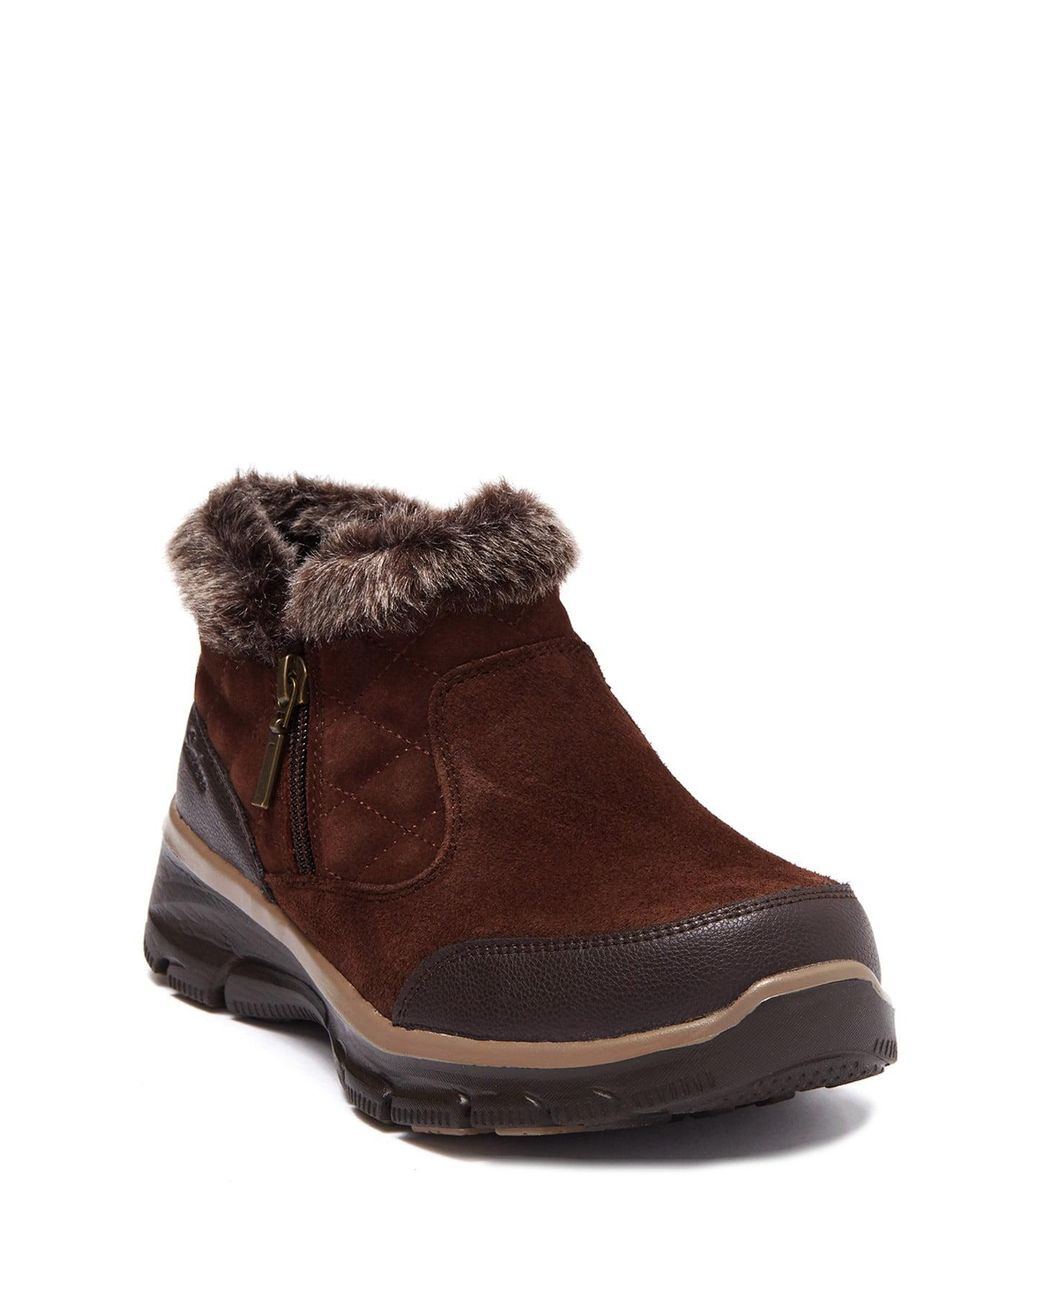 Skechers Easy Going Girl Crush Faux Fur Cuff Ankle Boot in Brown - Lyst